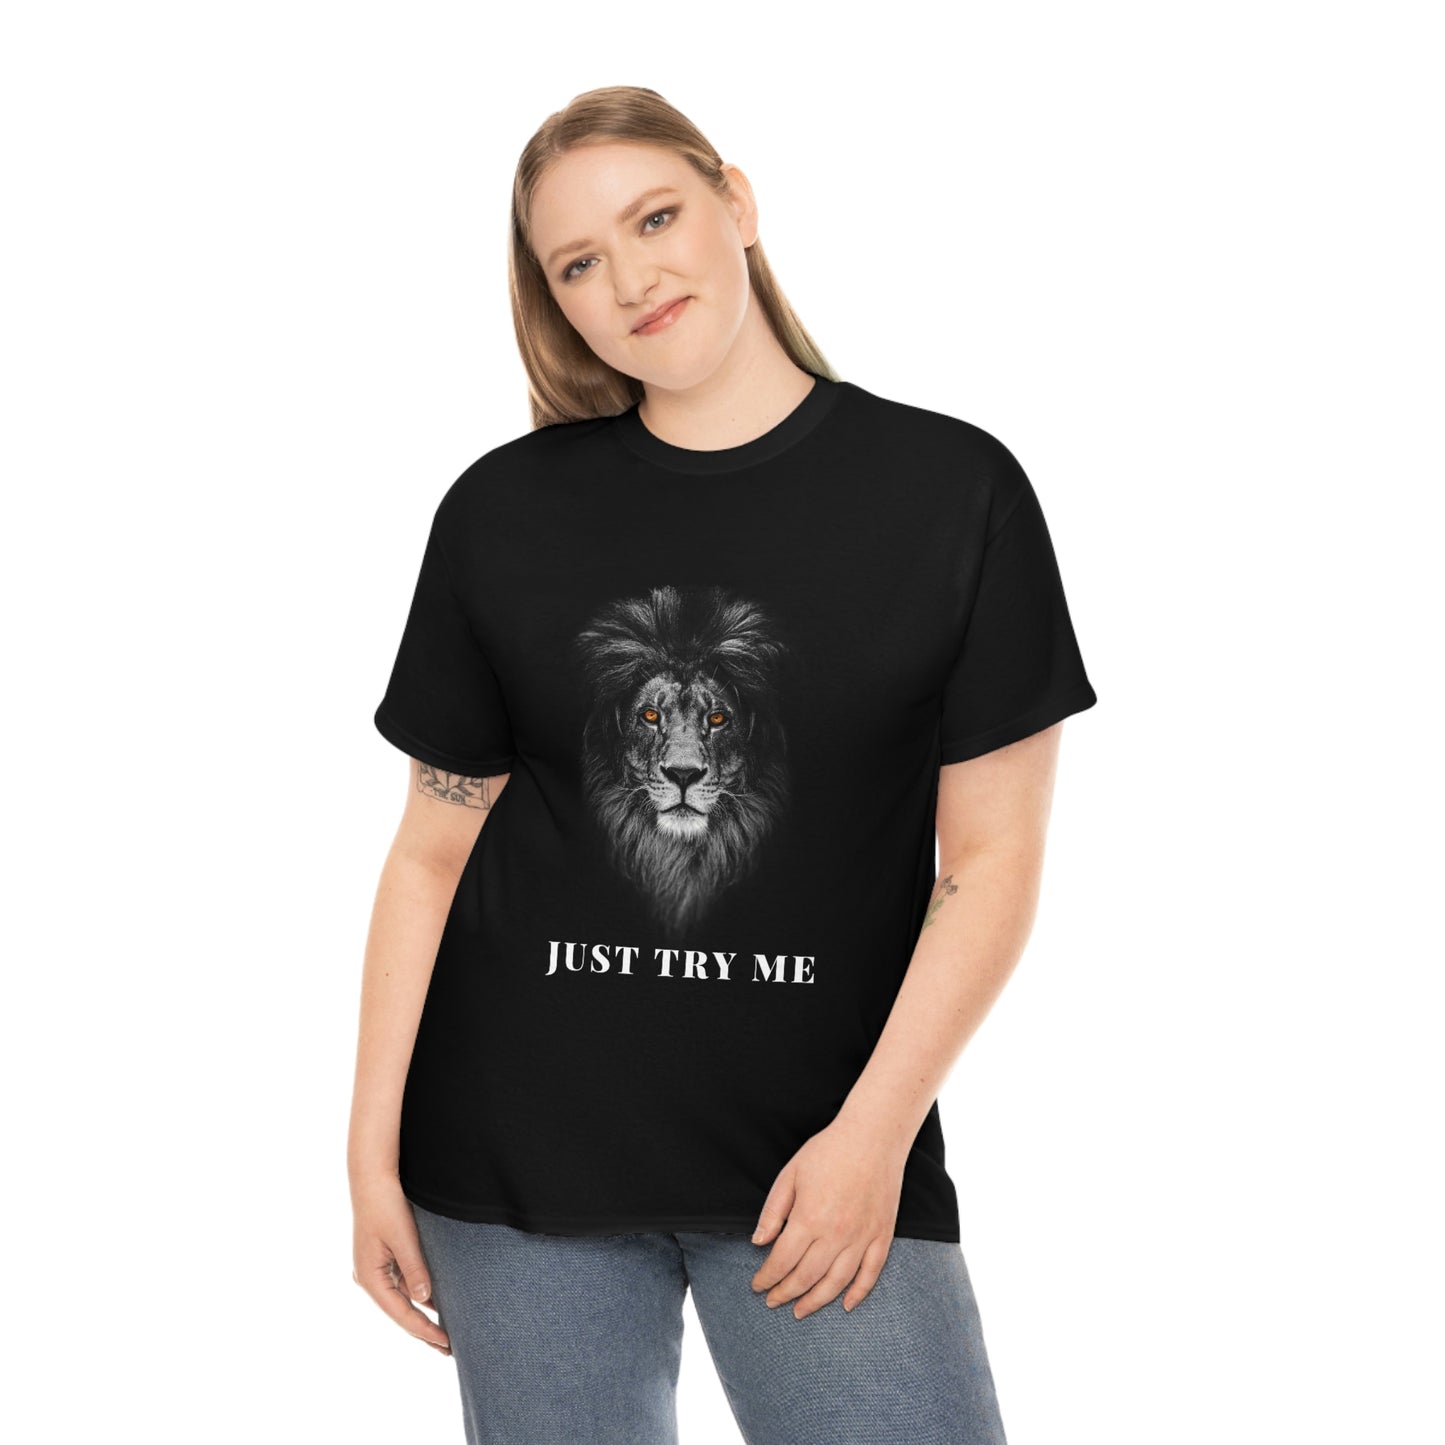 Lion - Just Try Me, Lion Face T-shirt, Lion Face T-shirt, Wild African Life, Animal Lover, Animal Face Shirt, Zoo Shirt, Animal Shirt, Lion Shirt